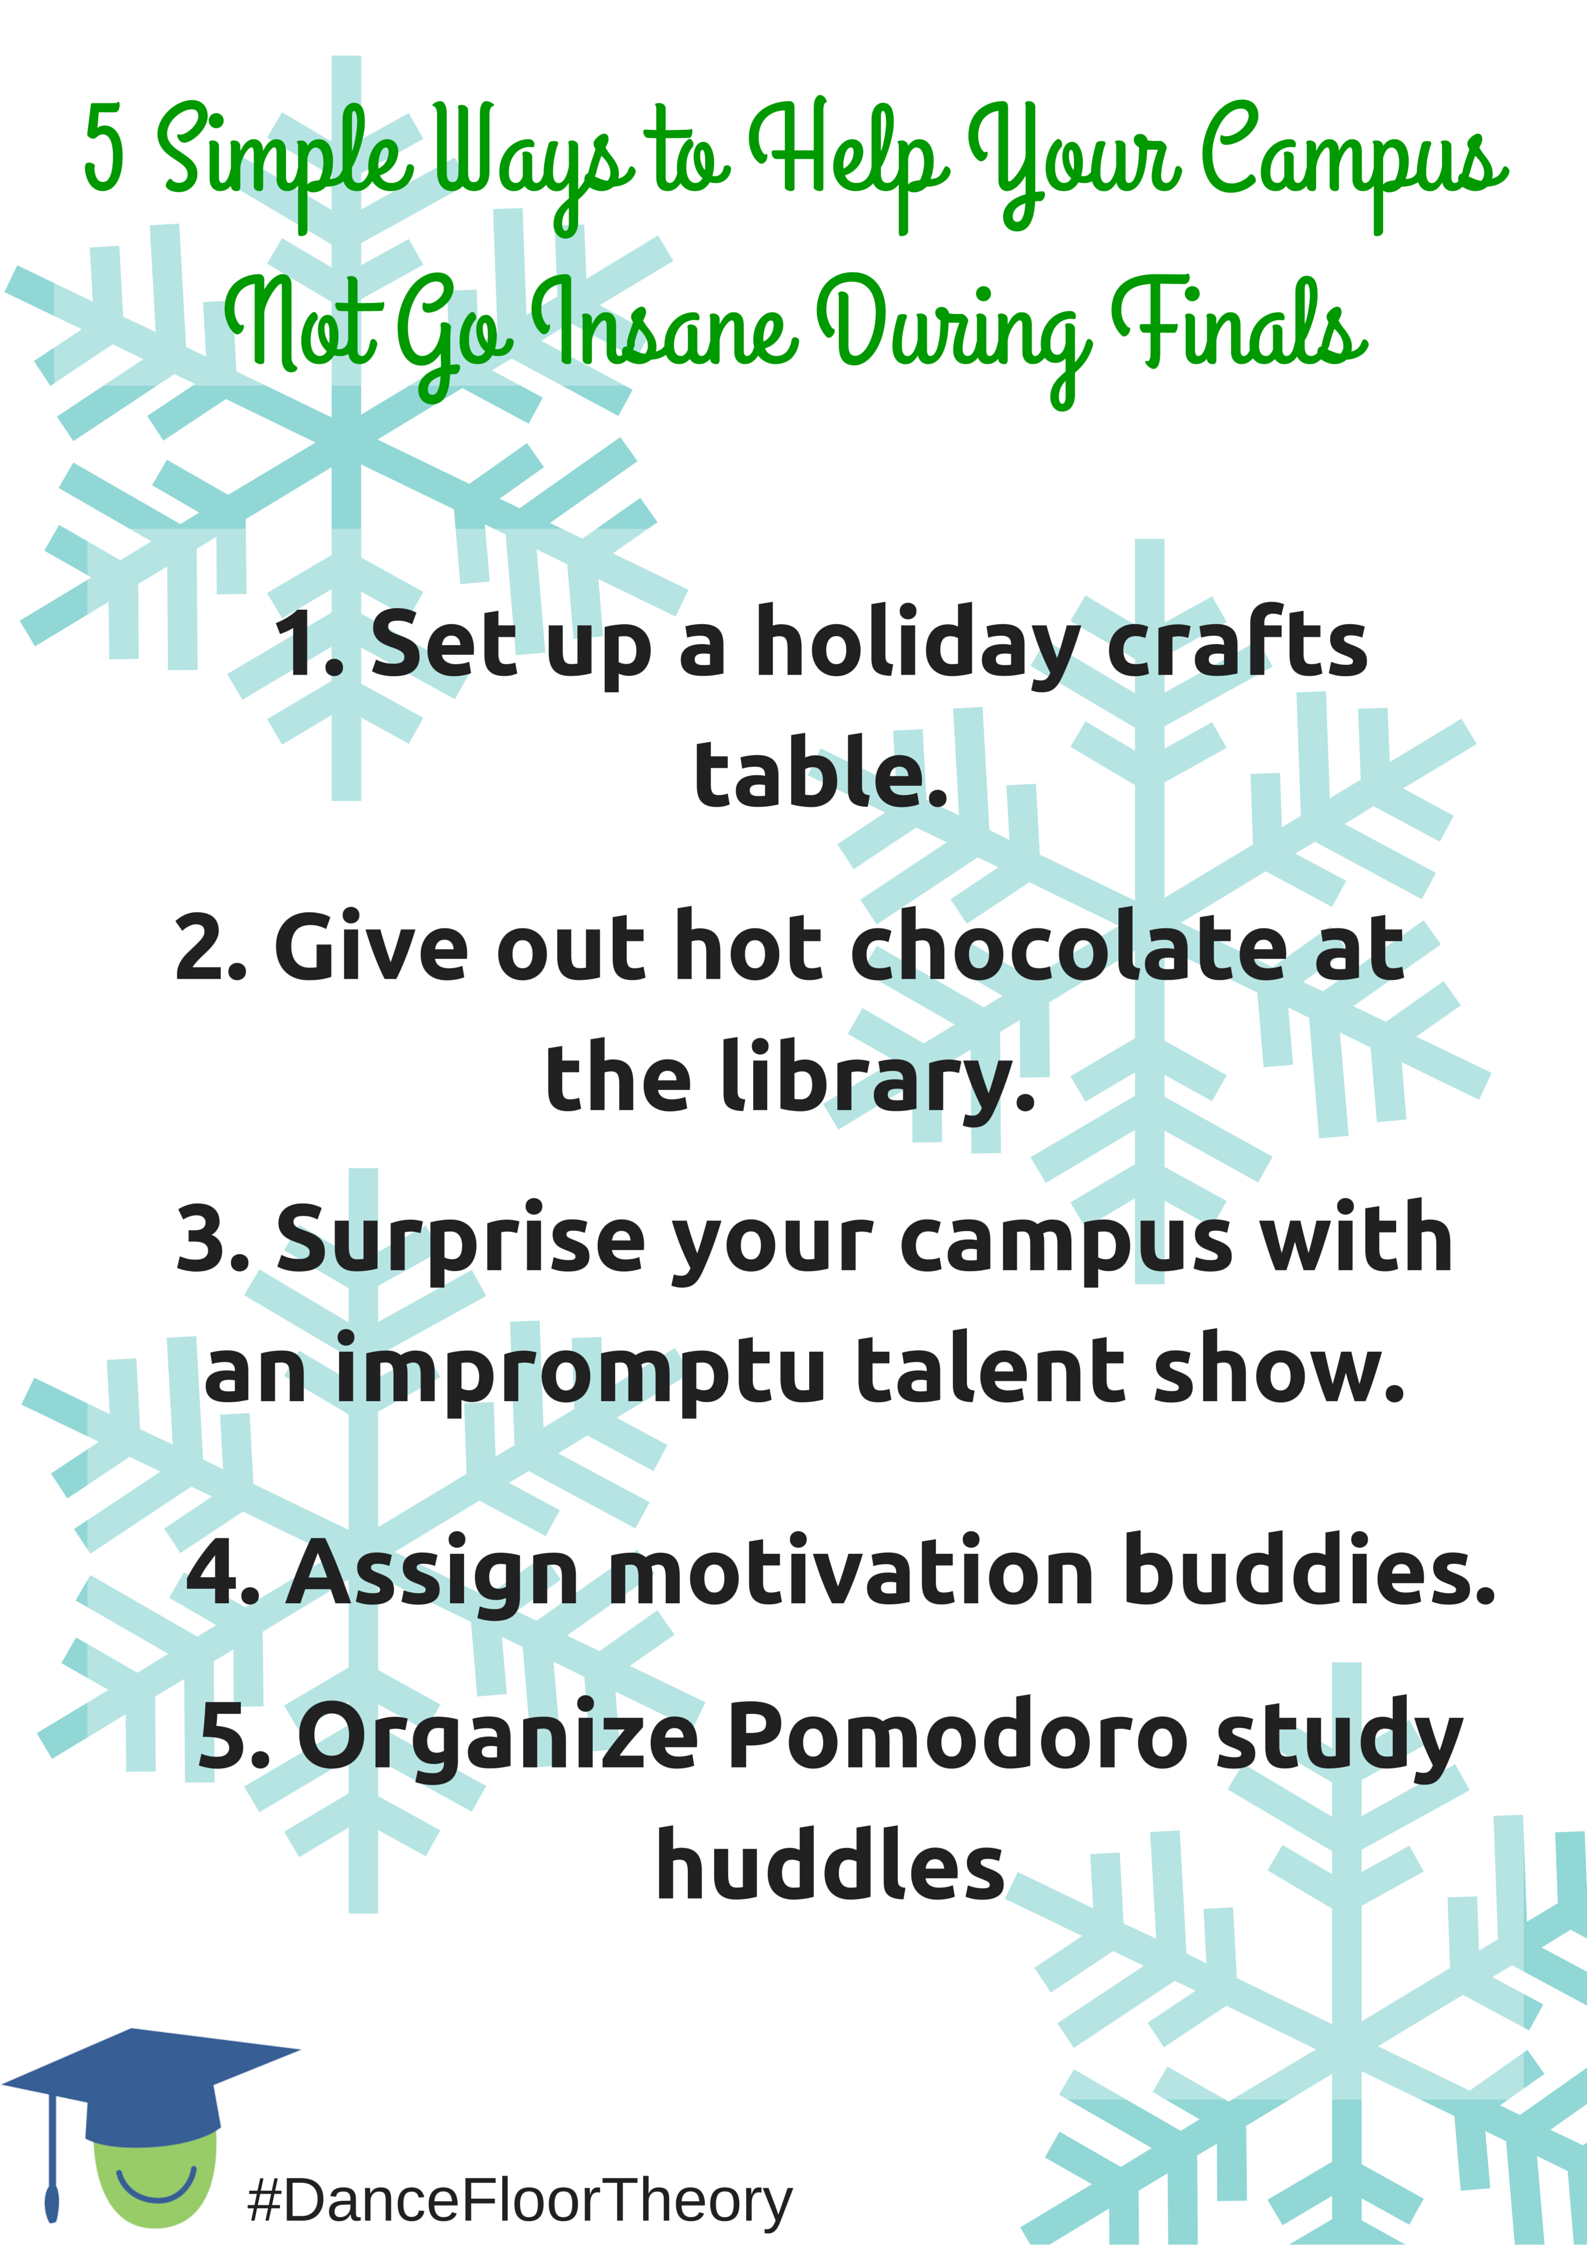 5 Simple Ways to Help Your Campus Not Go Insane During Finals